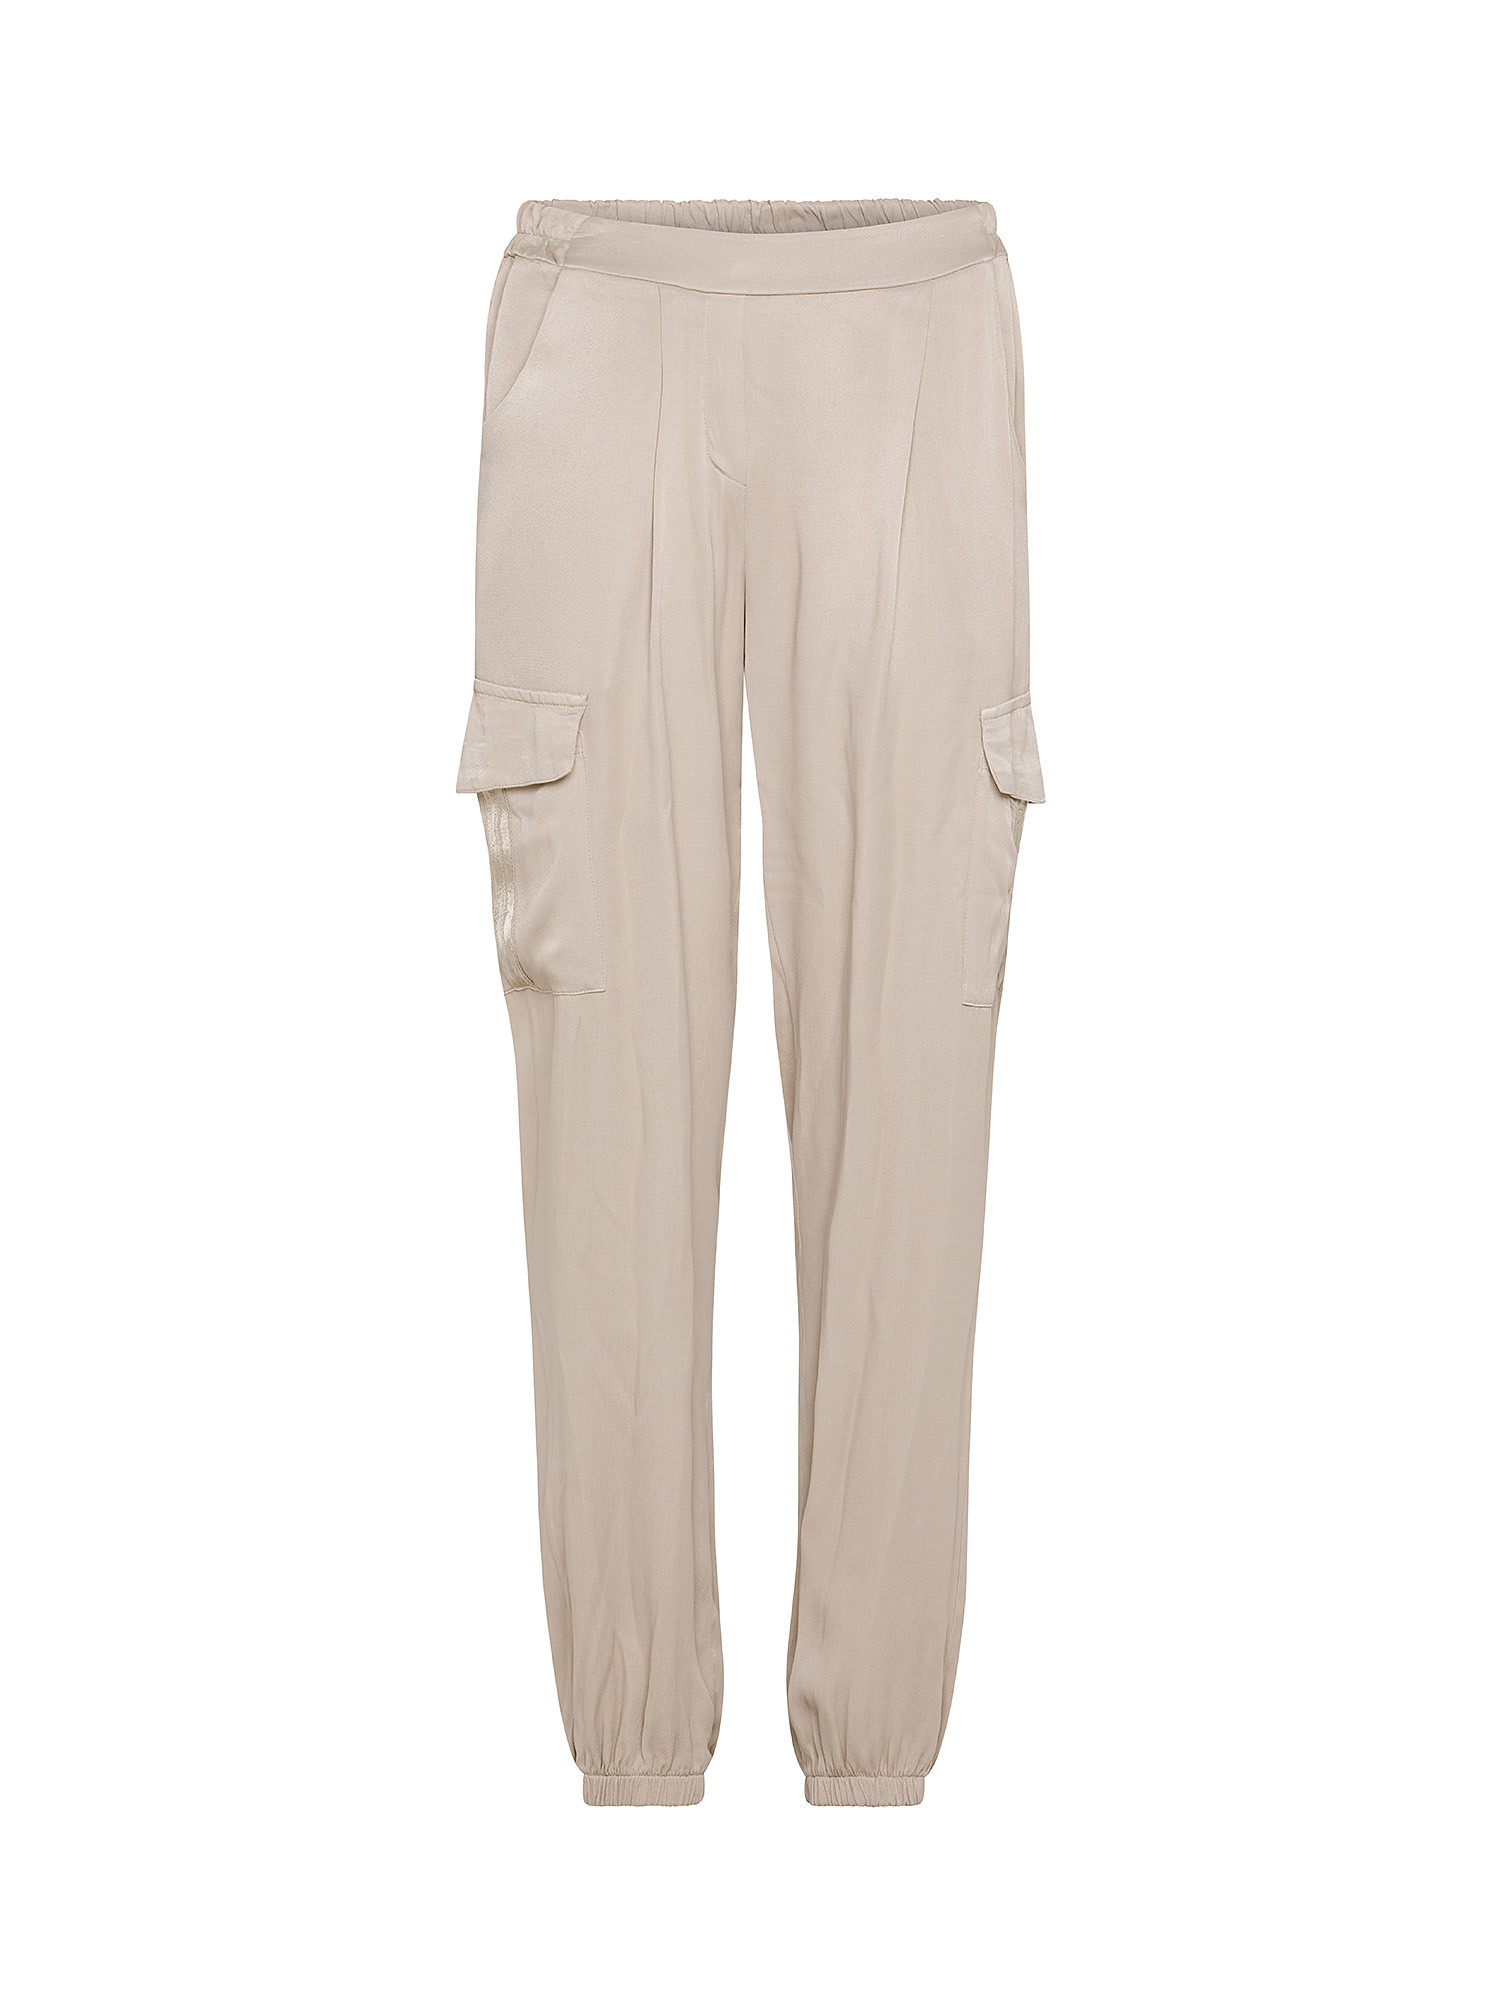 Cargo trousers, Beige, large image number 0